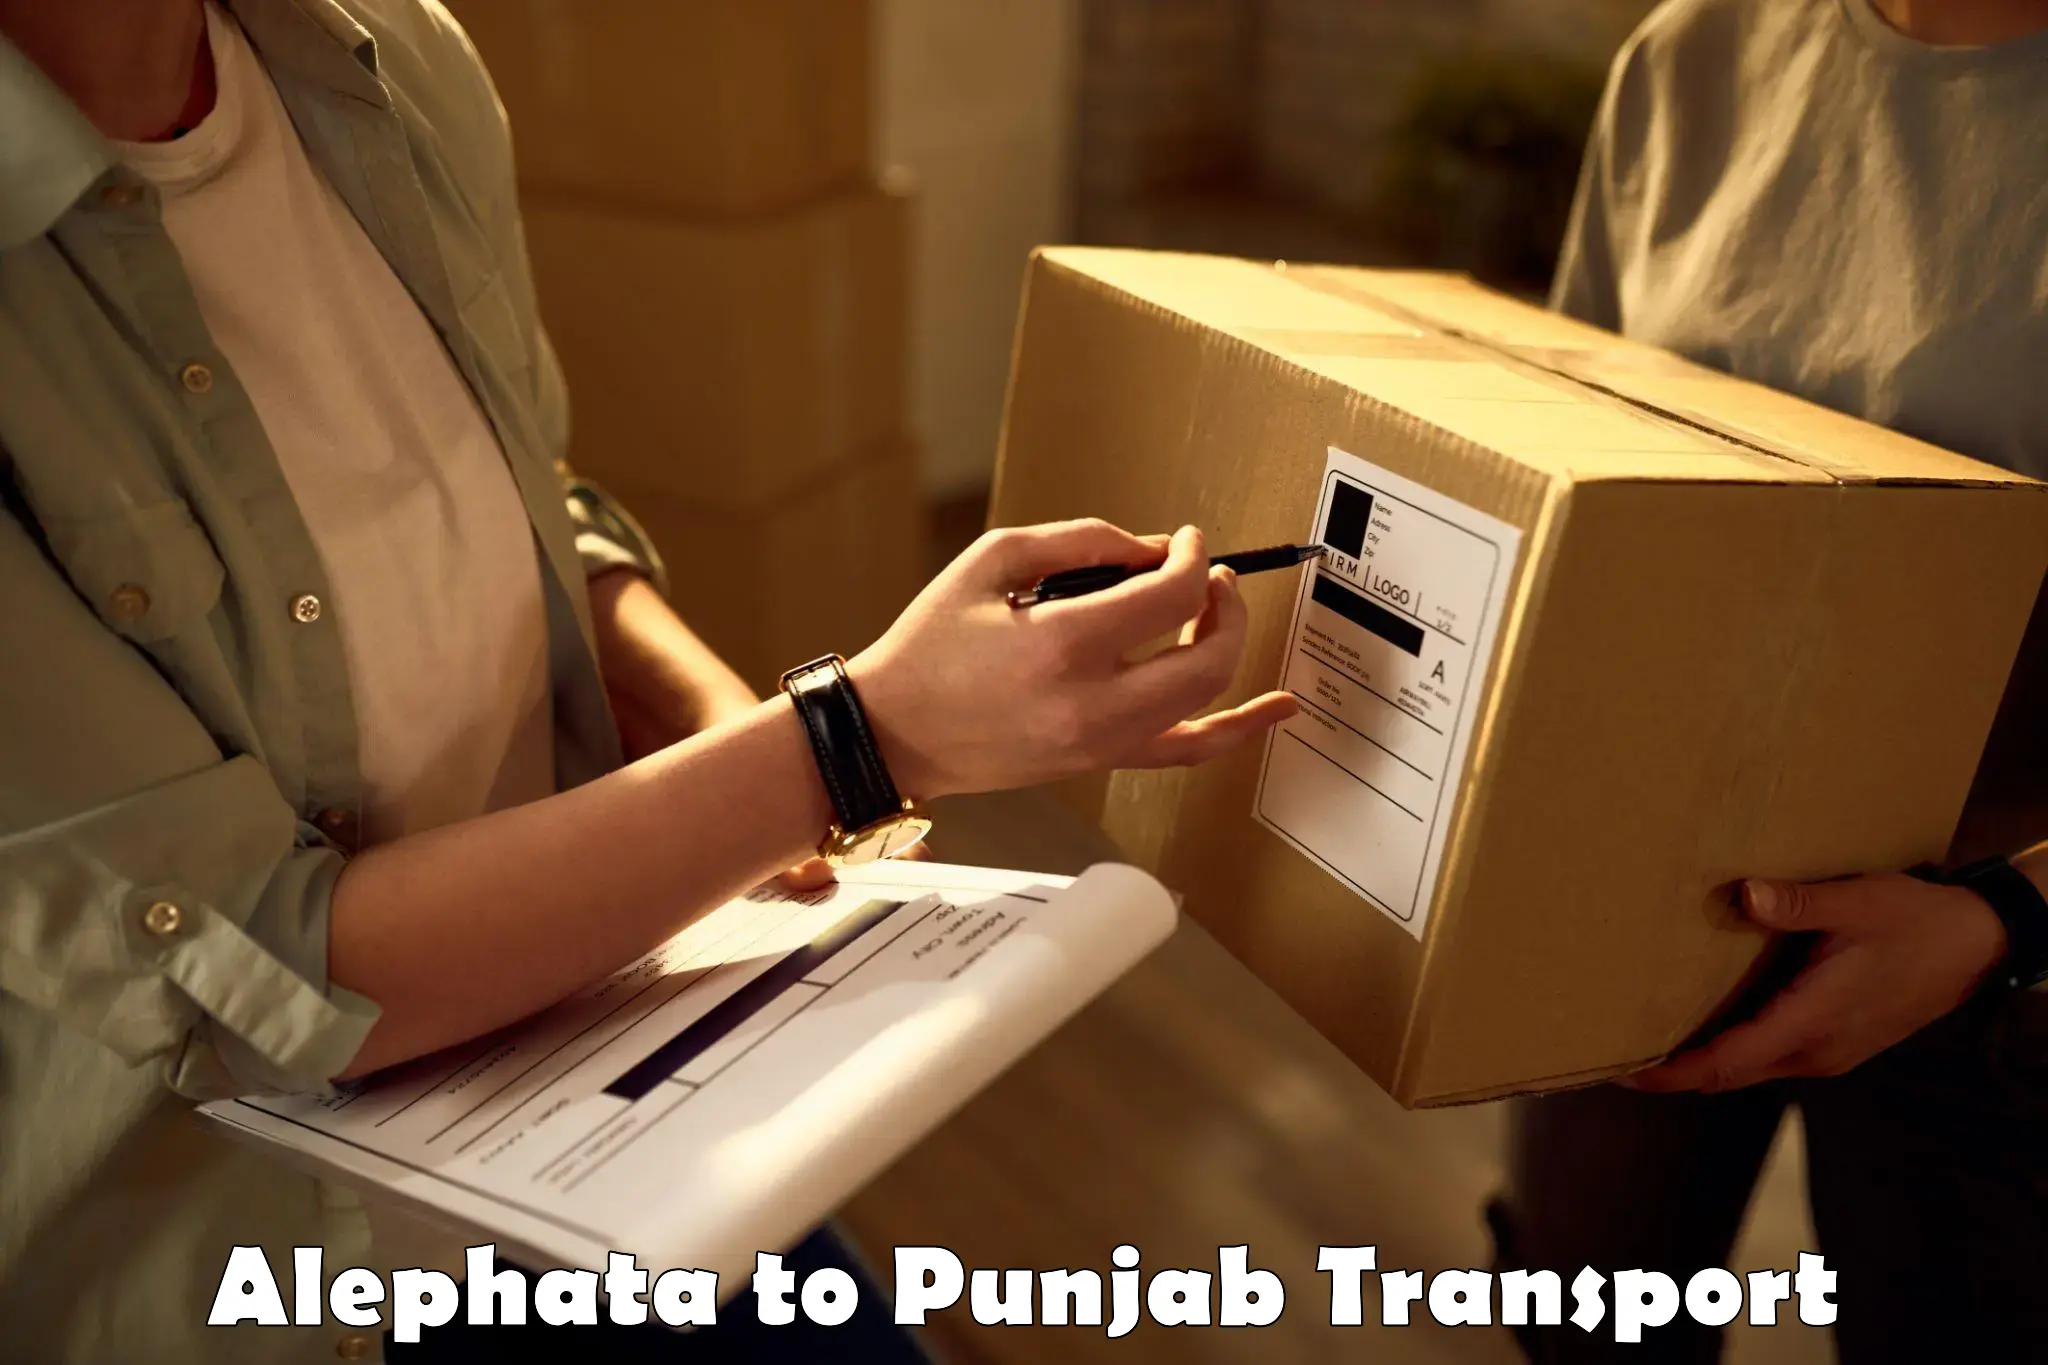 Parcel transport services Alephata to Ludhiana